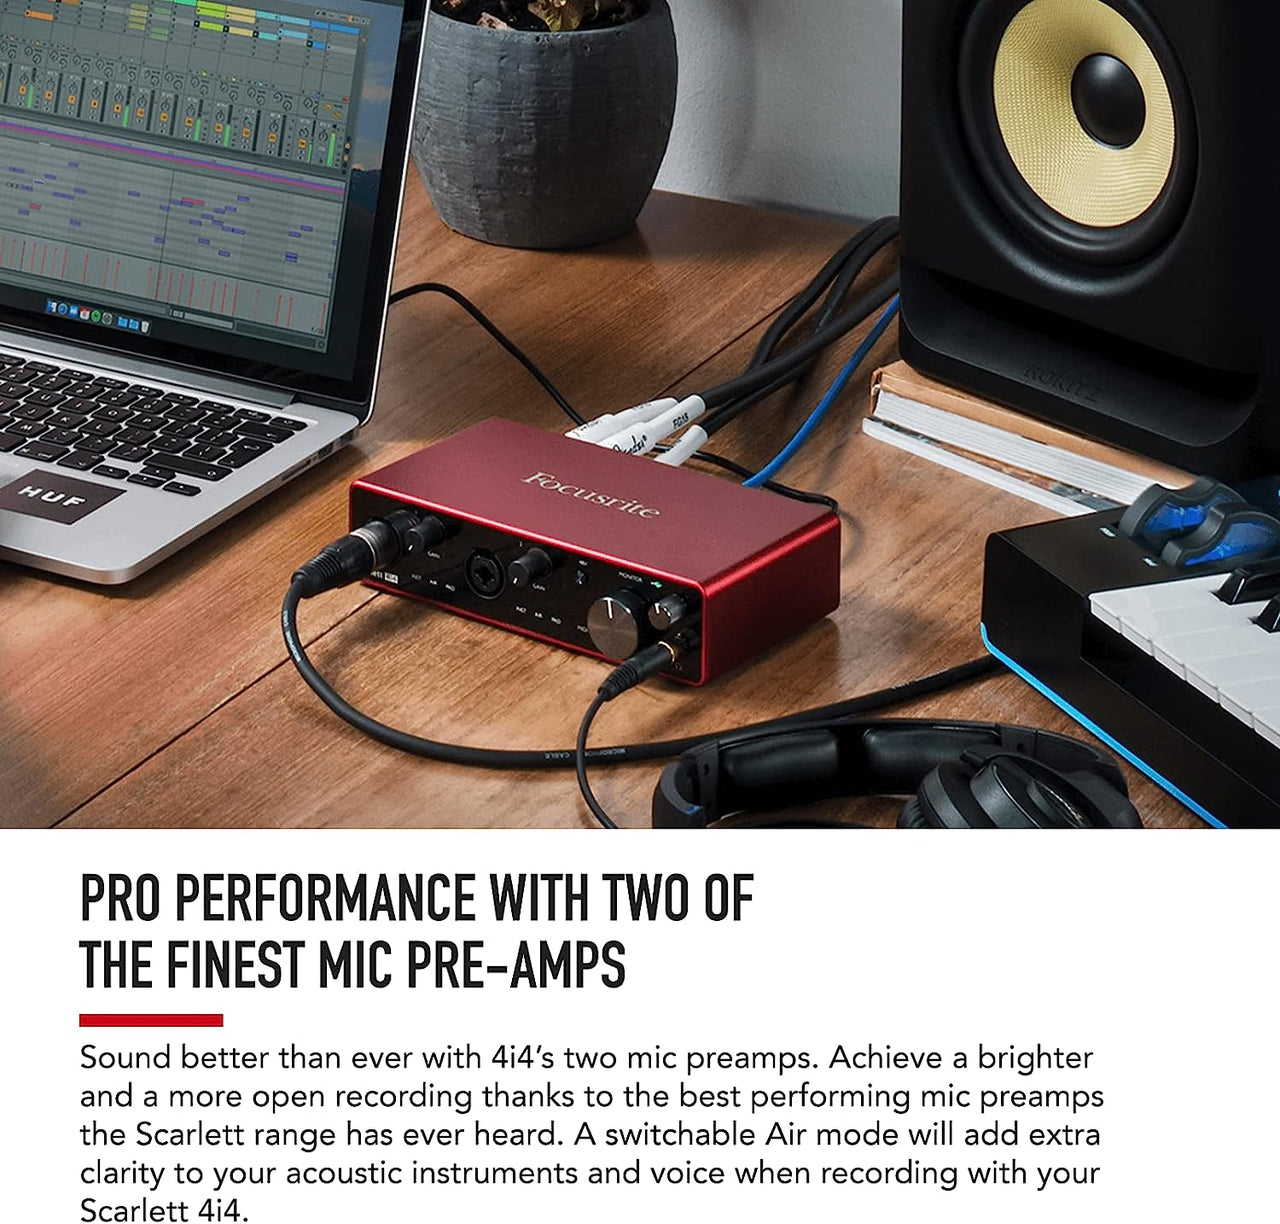 Focusrite Scarlet 2i2 is a great audio interface to help improve your  podcast efforts